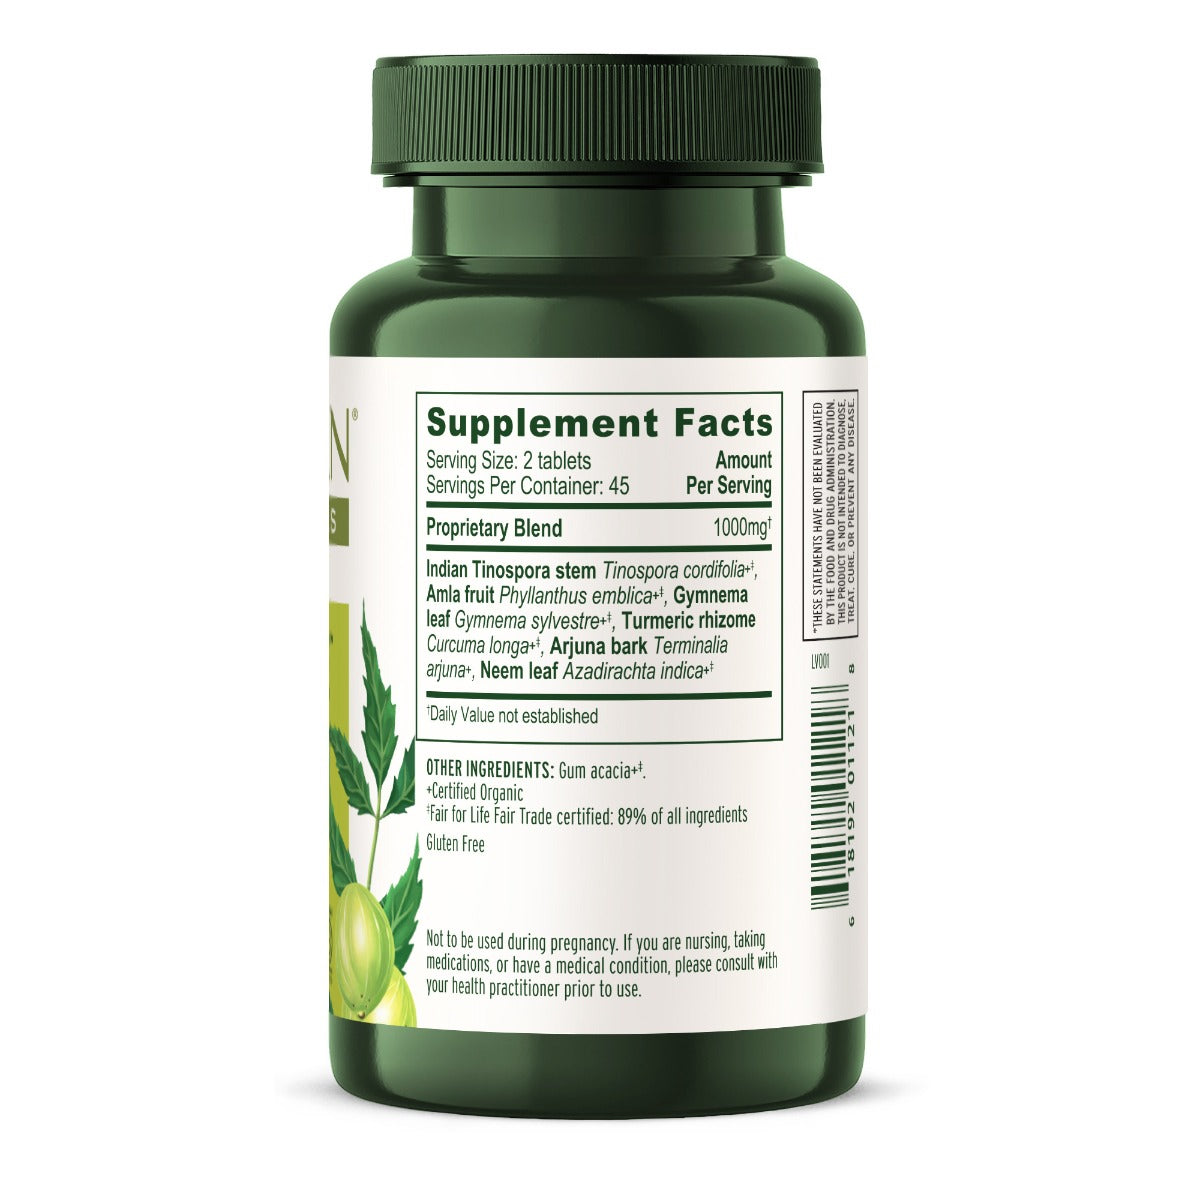 Sweet Ease tablets supplement facts